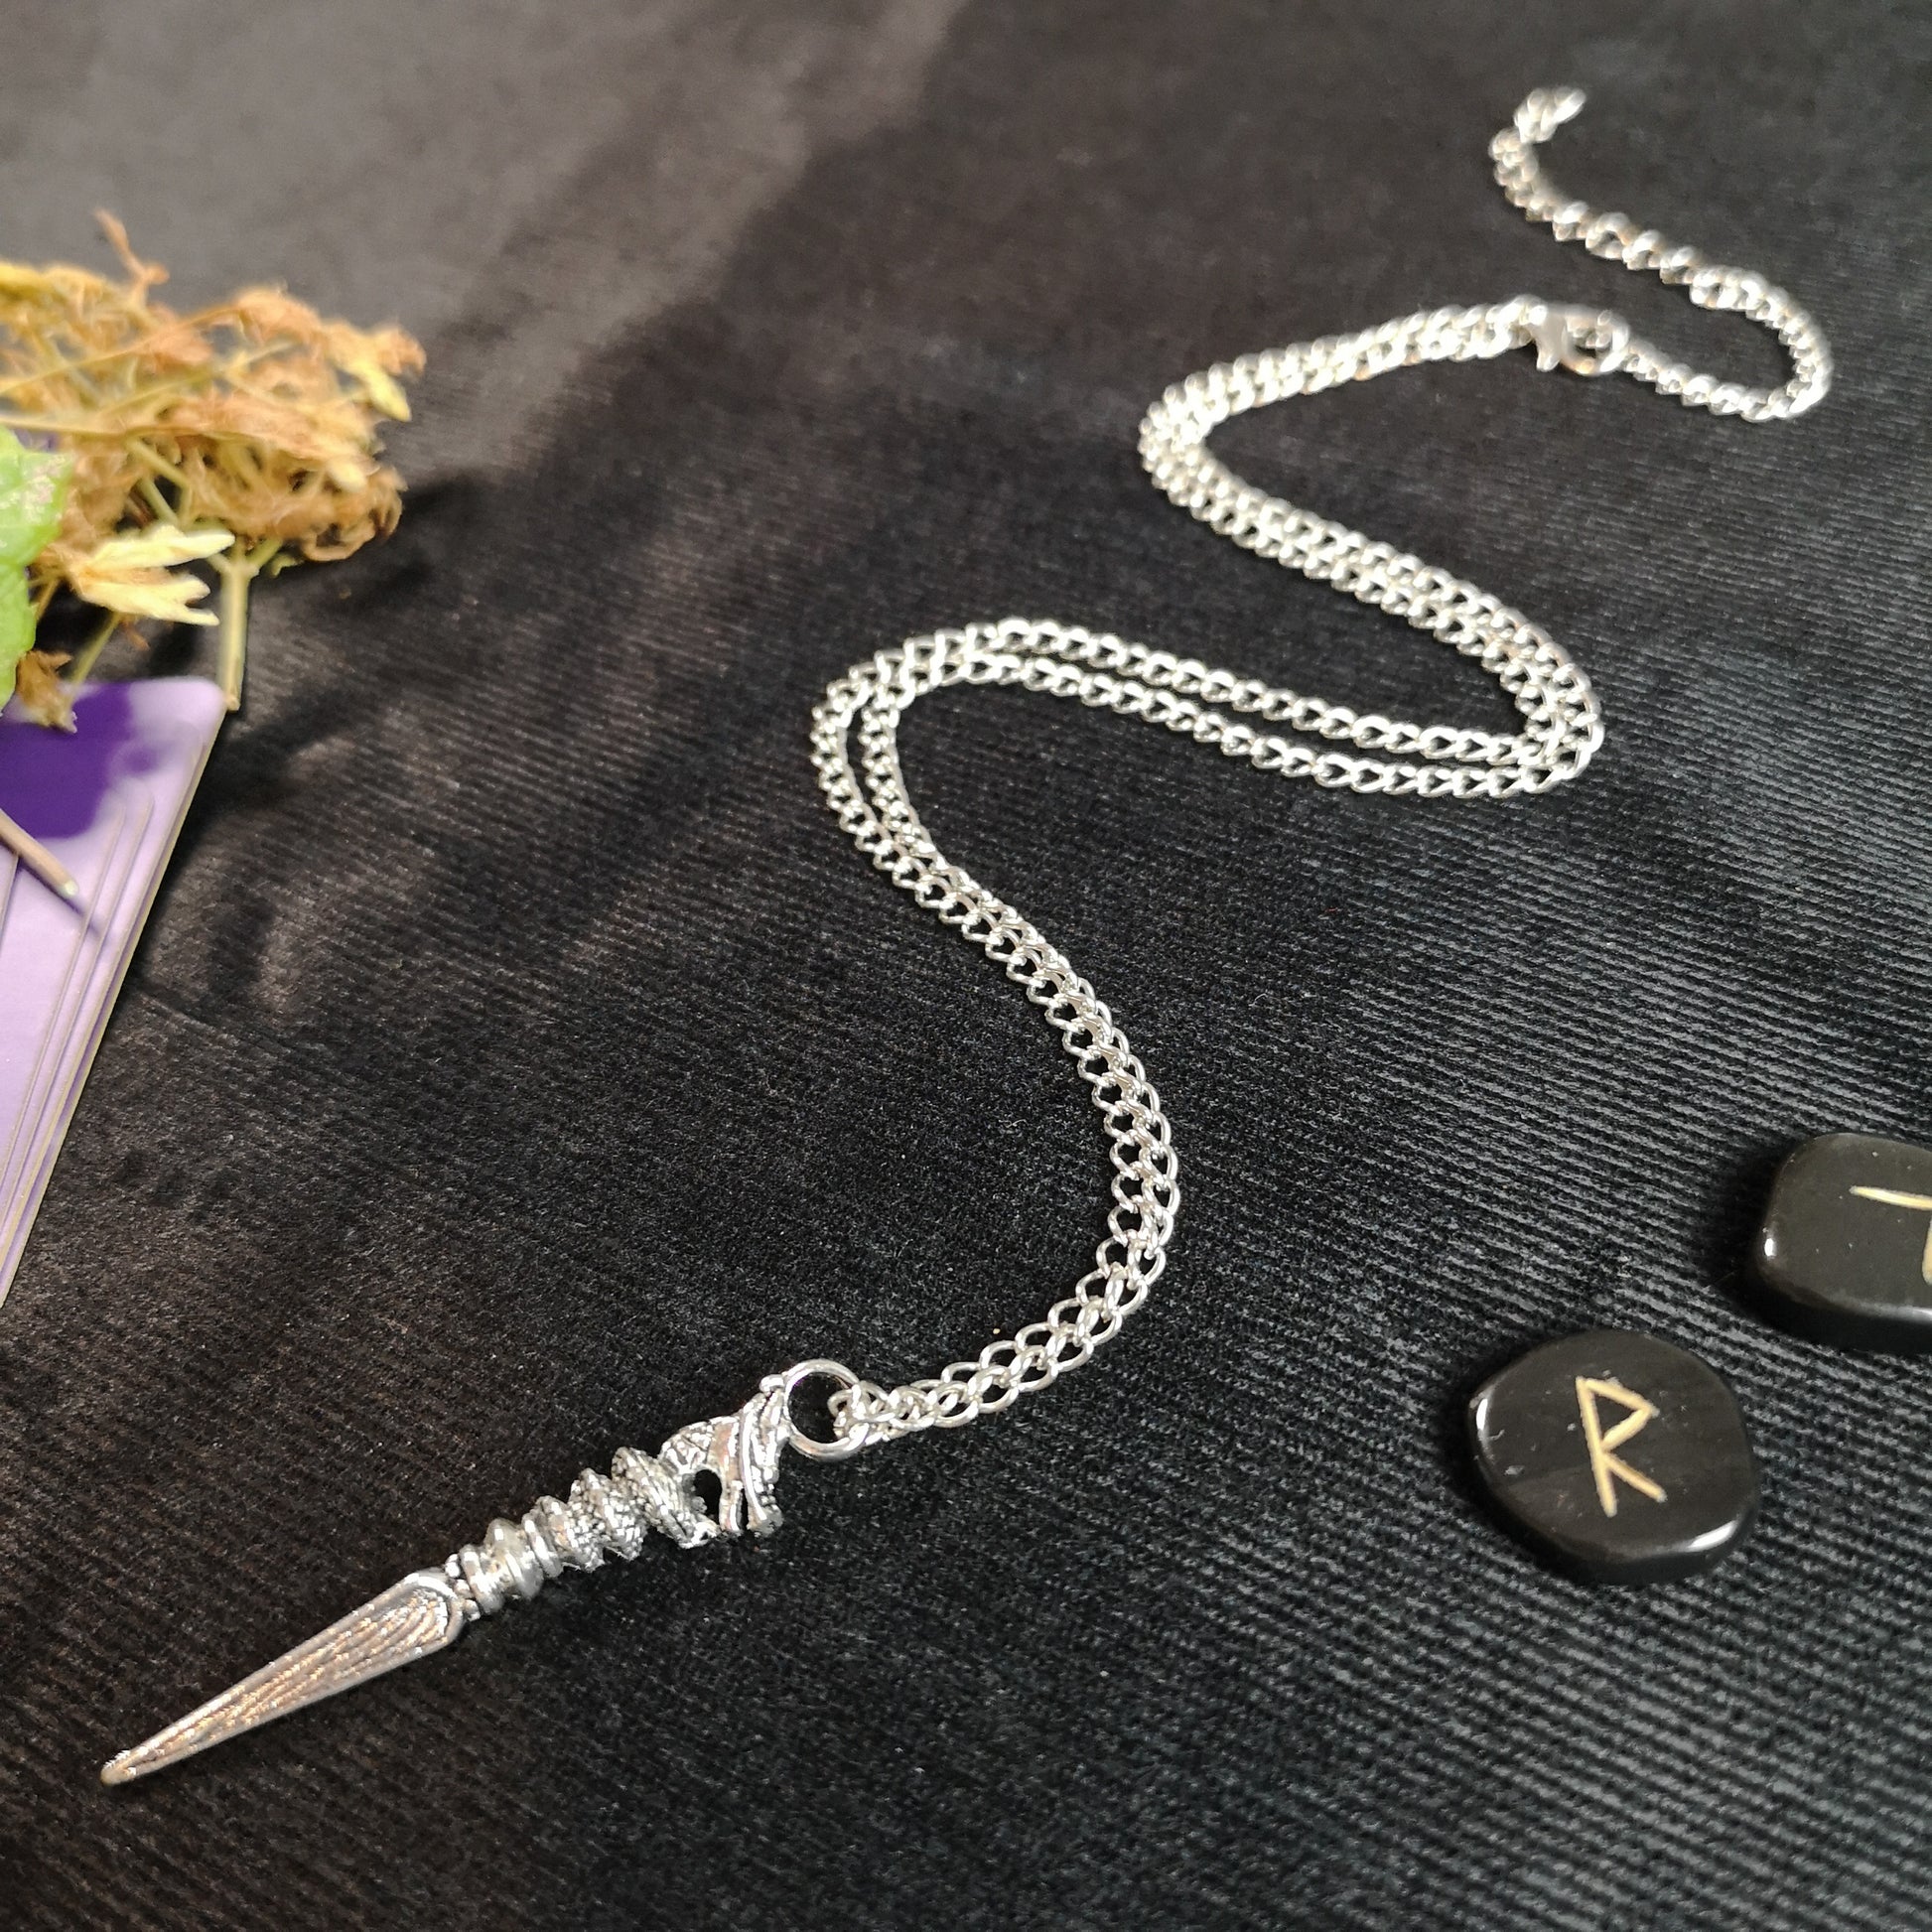 Dragon dagger necklace - The French Witch shop